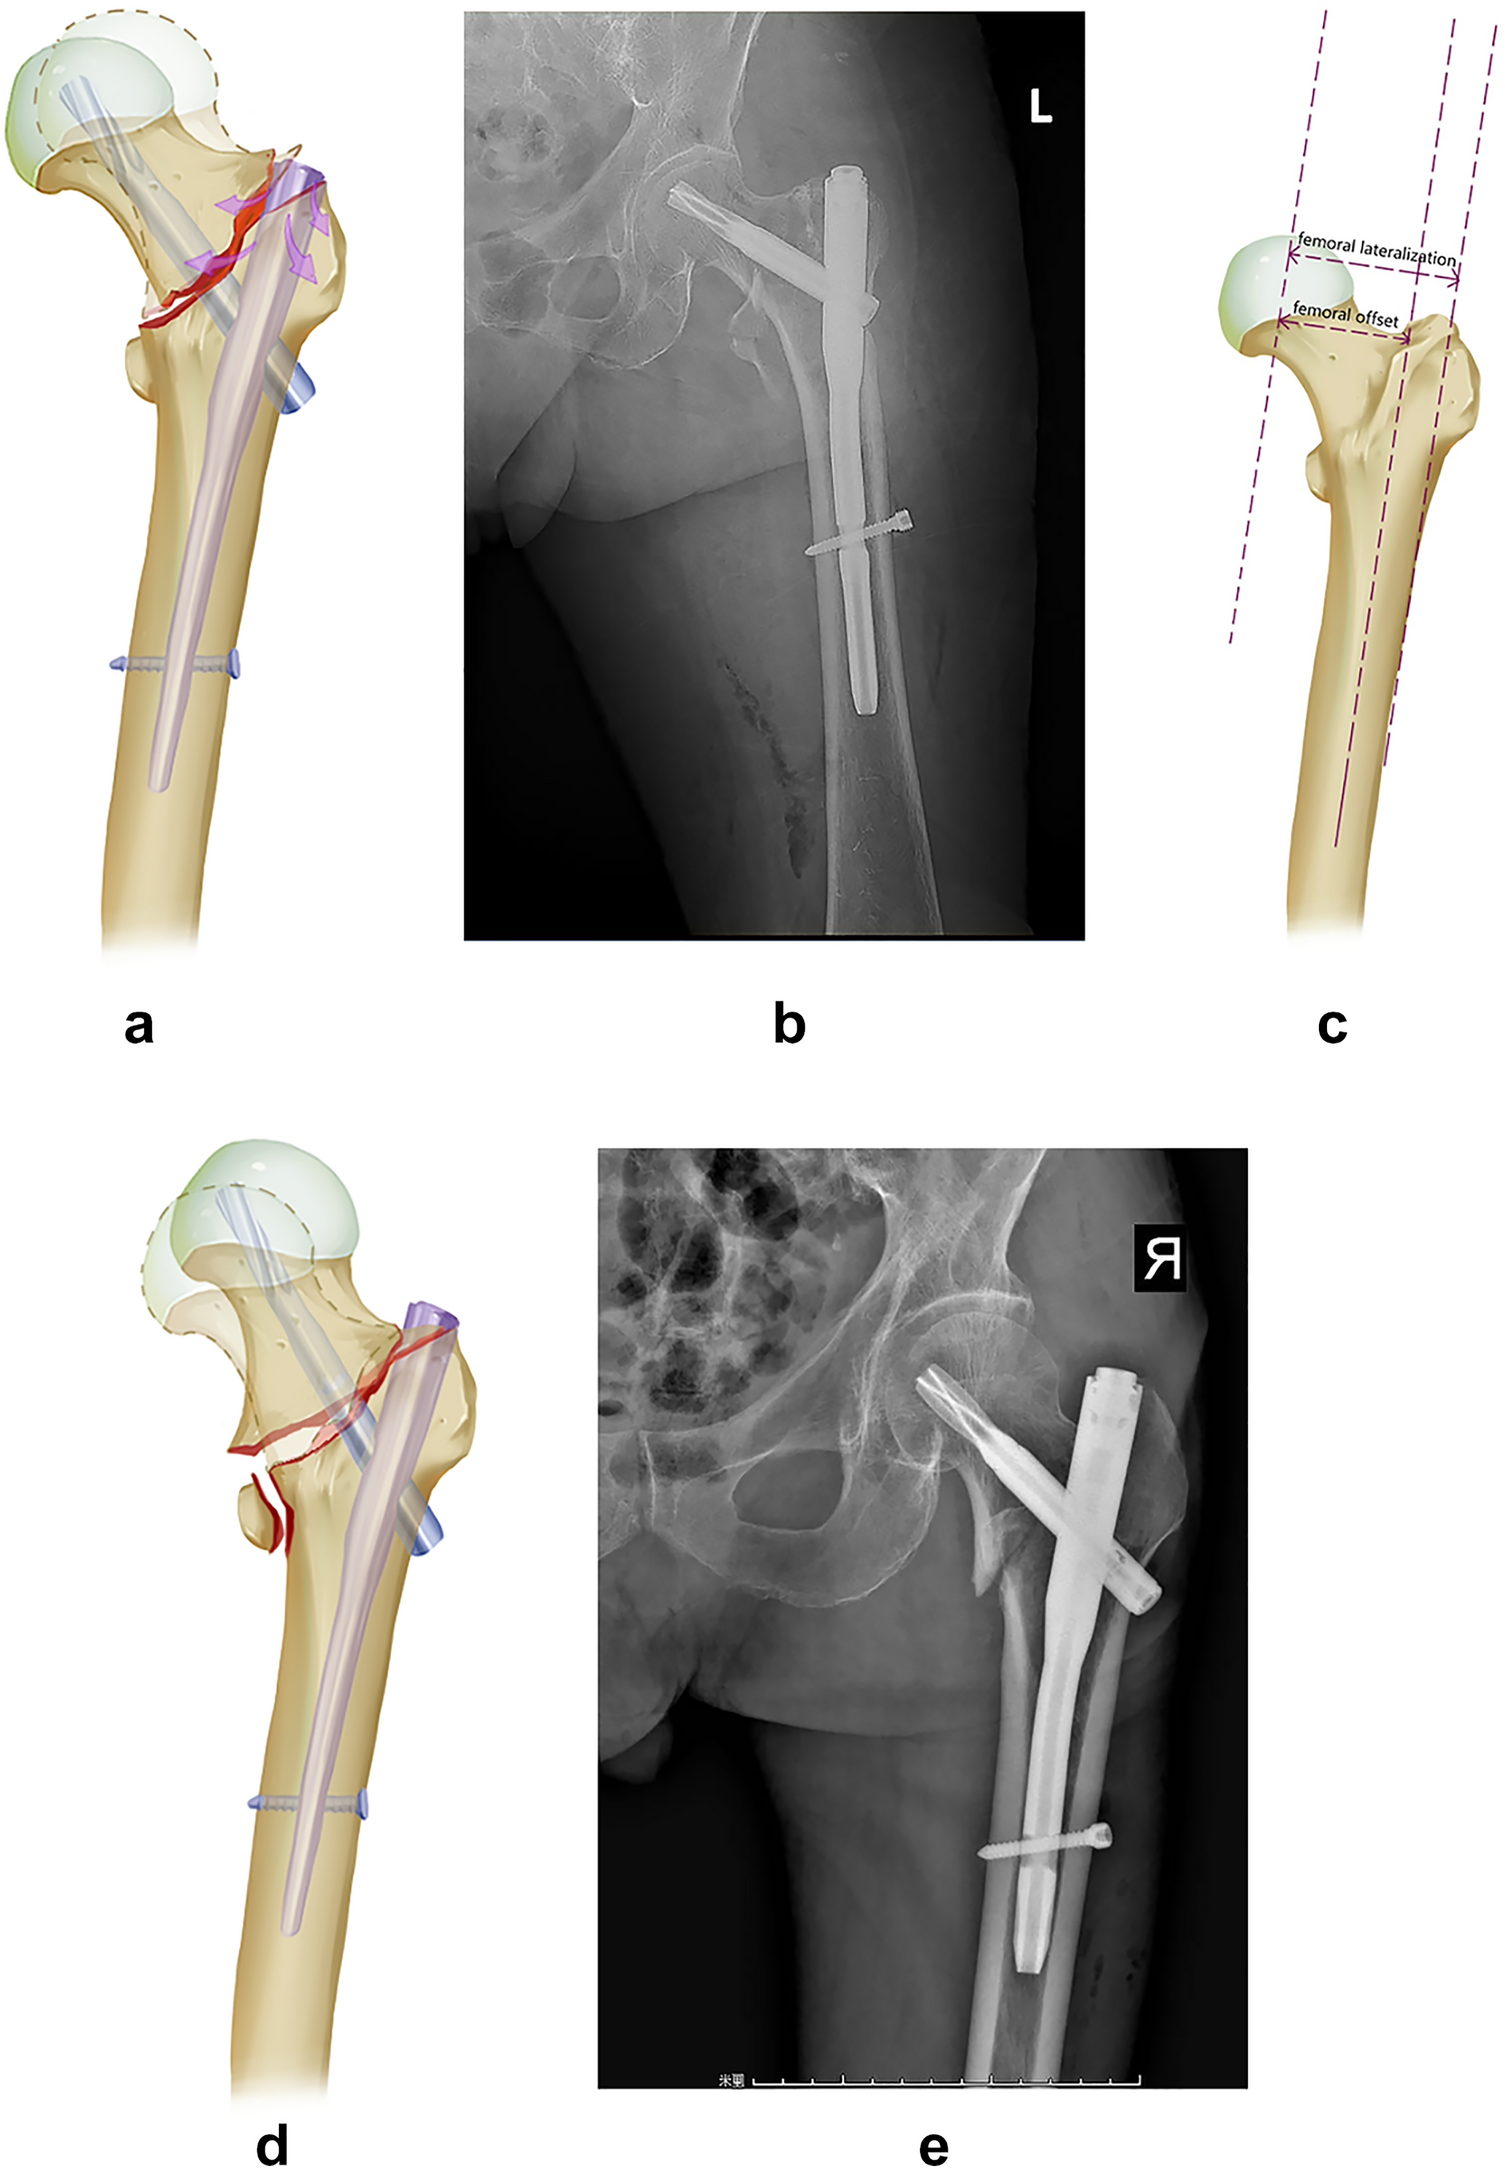 Treatment Strategies for Nonunion After Intramedullary Nailing for Femoral  Fracture: Experiences of Fifty Nonunion Patients